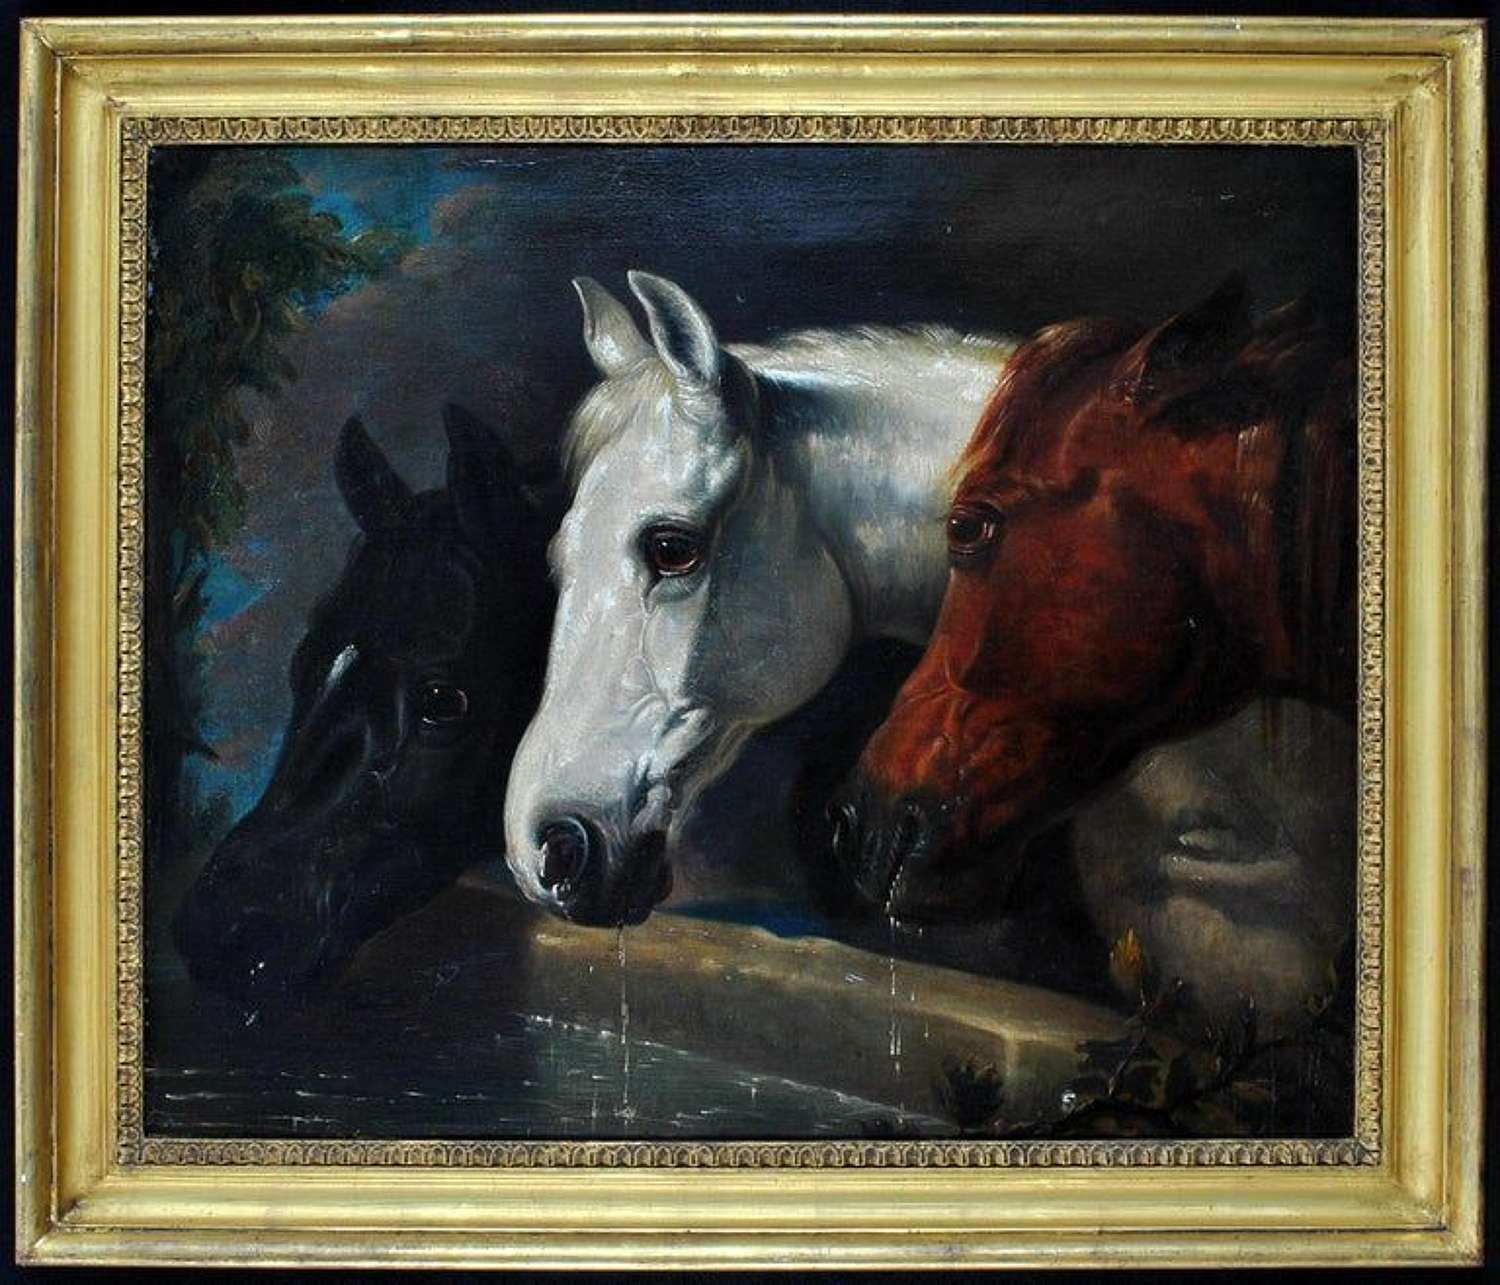 John Frederick Herring (1795-1865) Horses at a Trough, Oil on Canvas